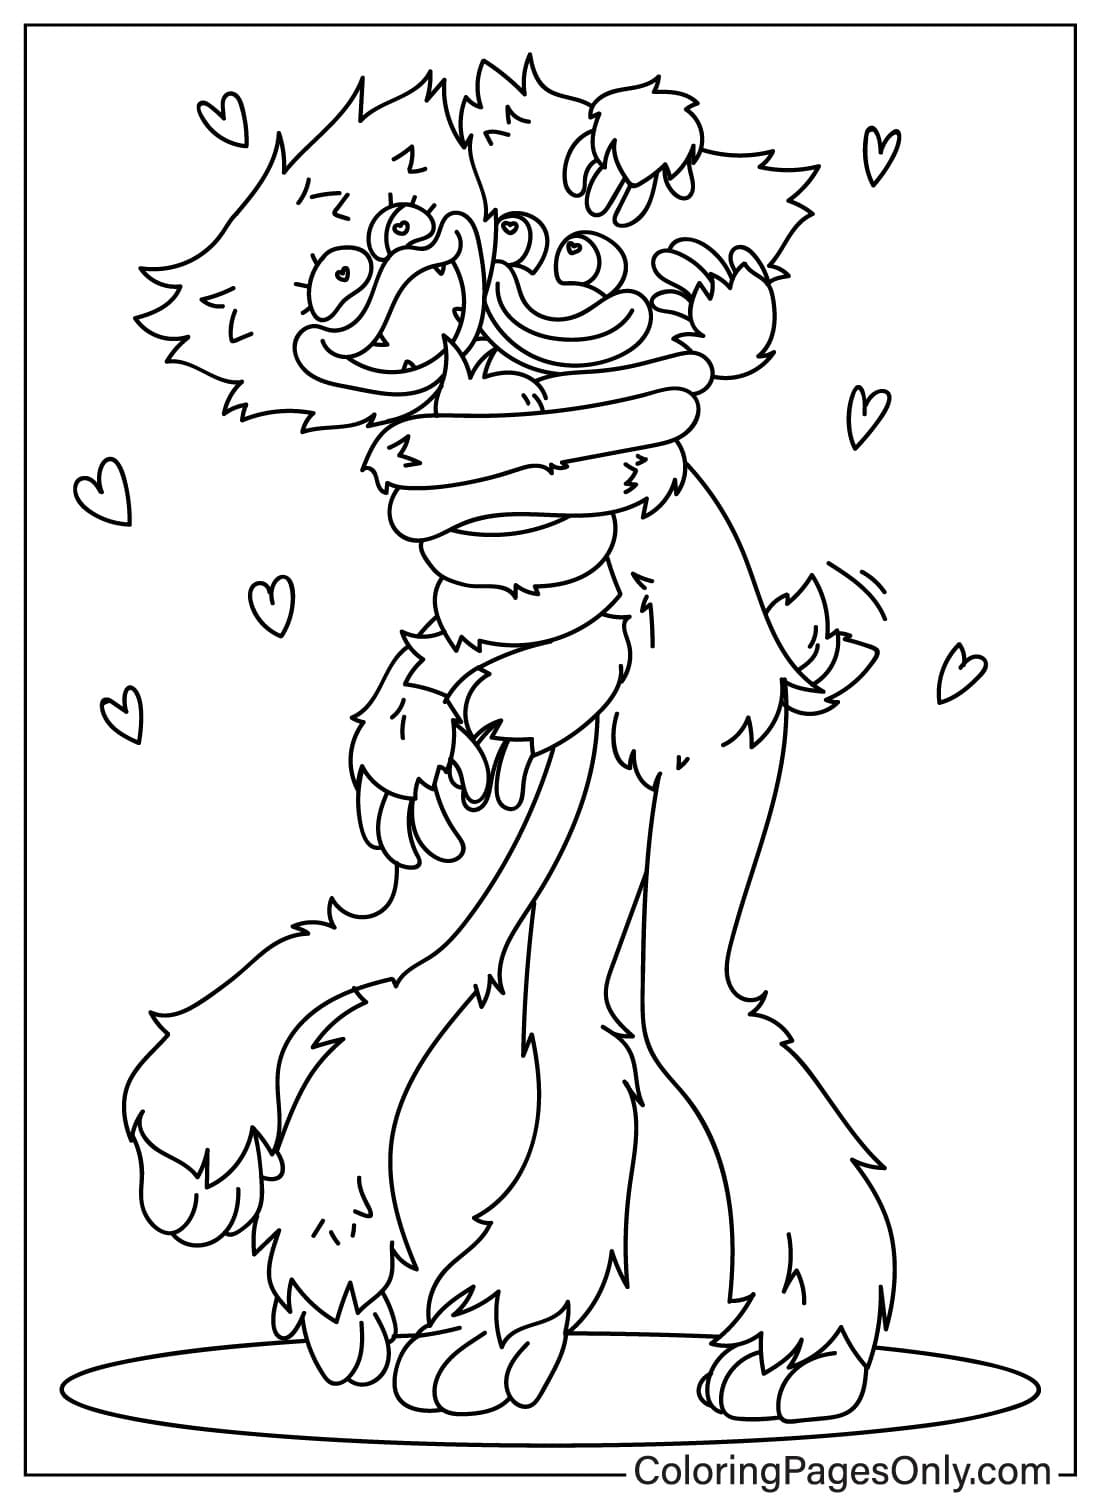 Coloriage Huggy Wuggy et Kissy Missy de Huggy Wuggy